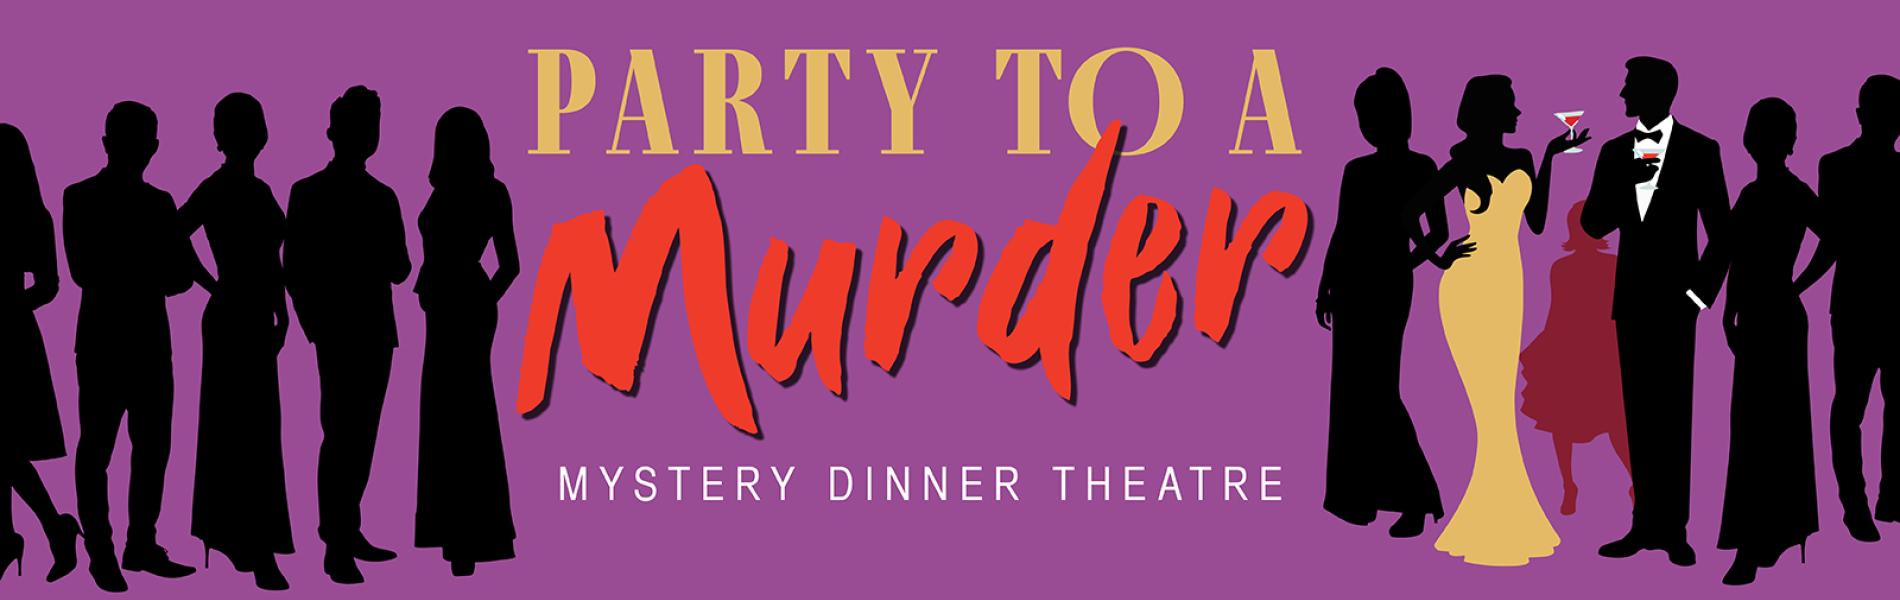 Party to a Murder: Murder Mystery Dinner